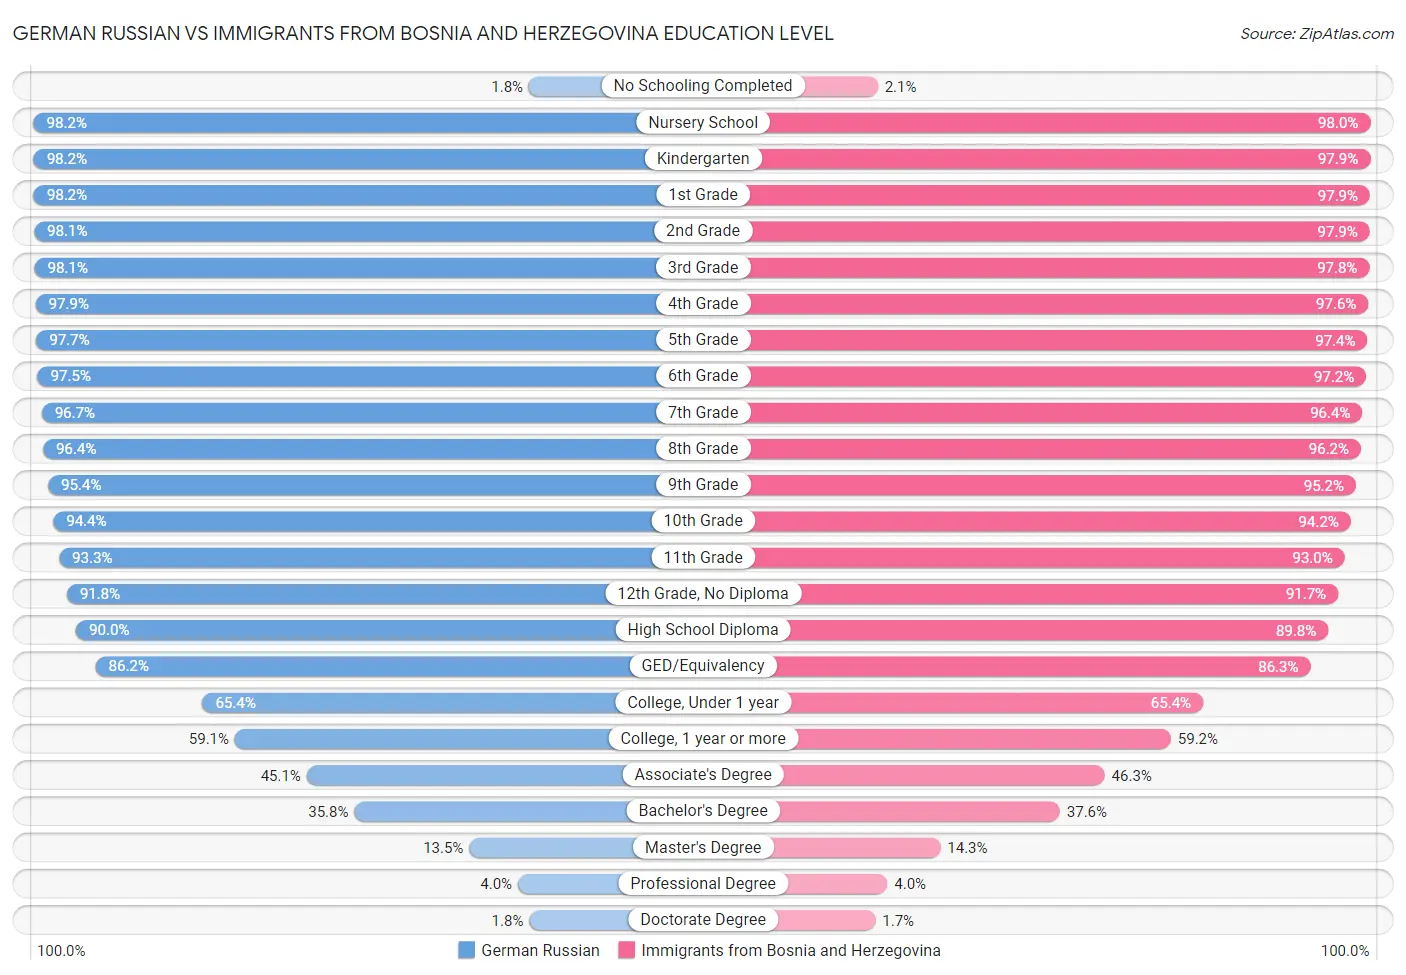 German Russian vs Immigrants from Bosnia and Herzegovina Education Level